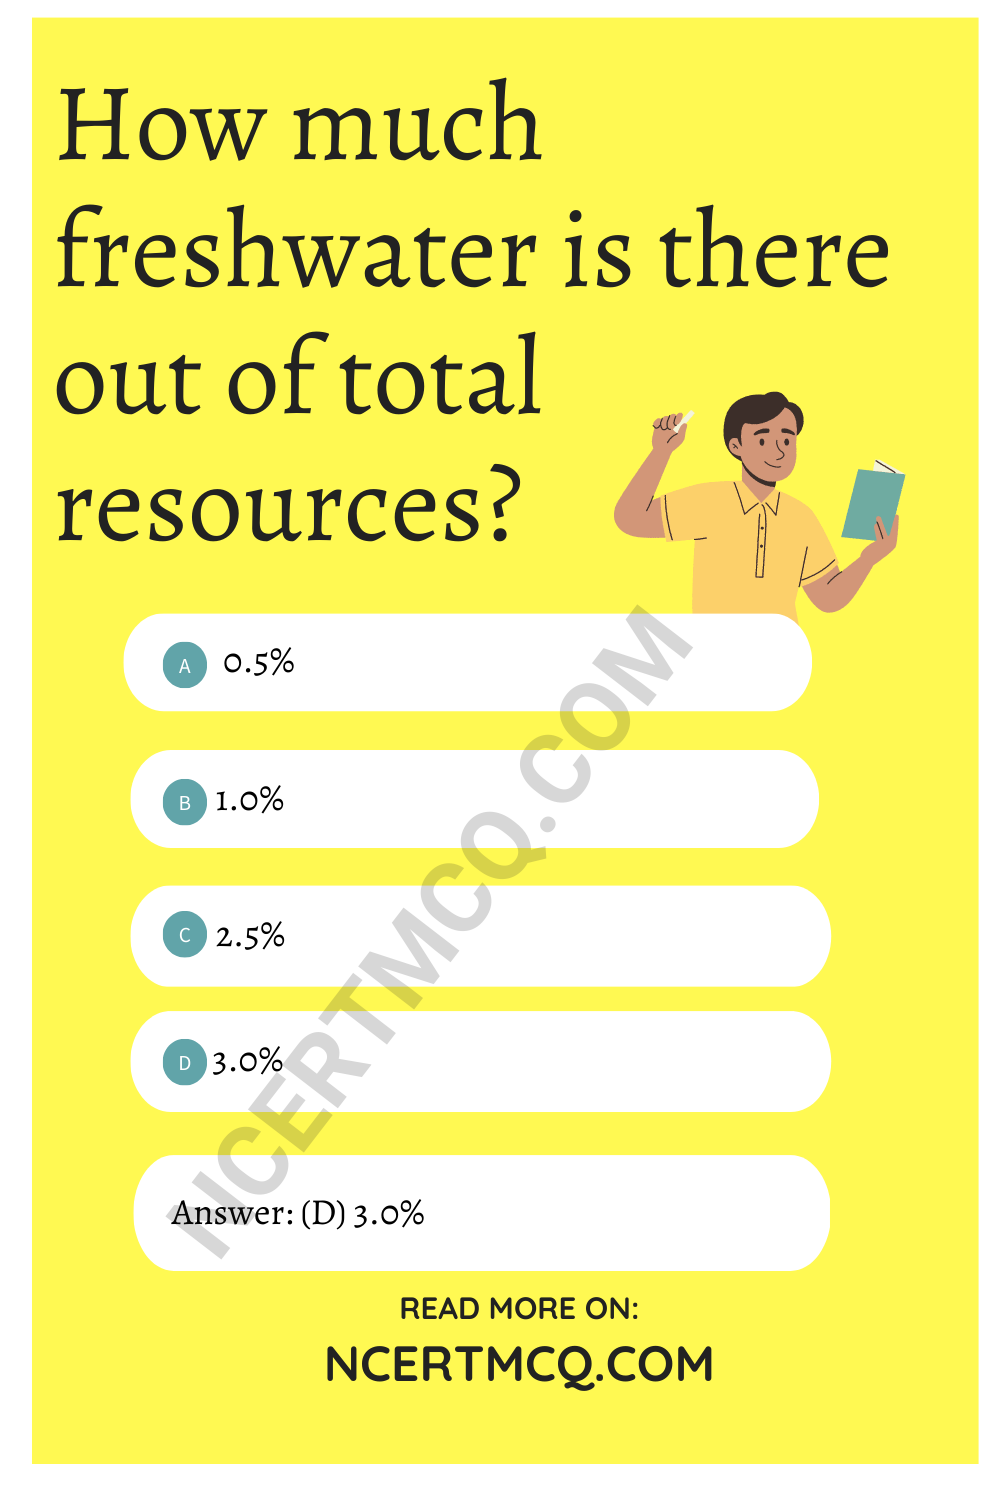 How much freshwater is there out of total resources?